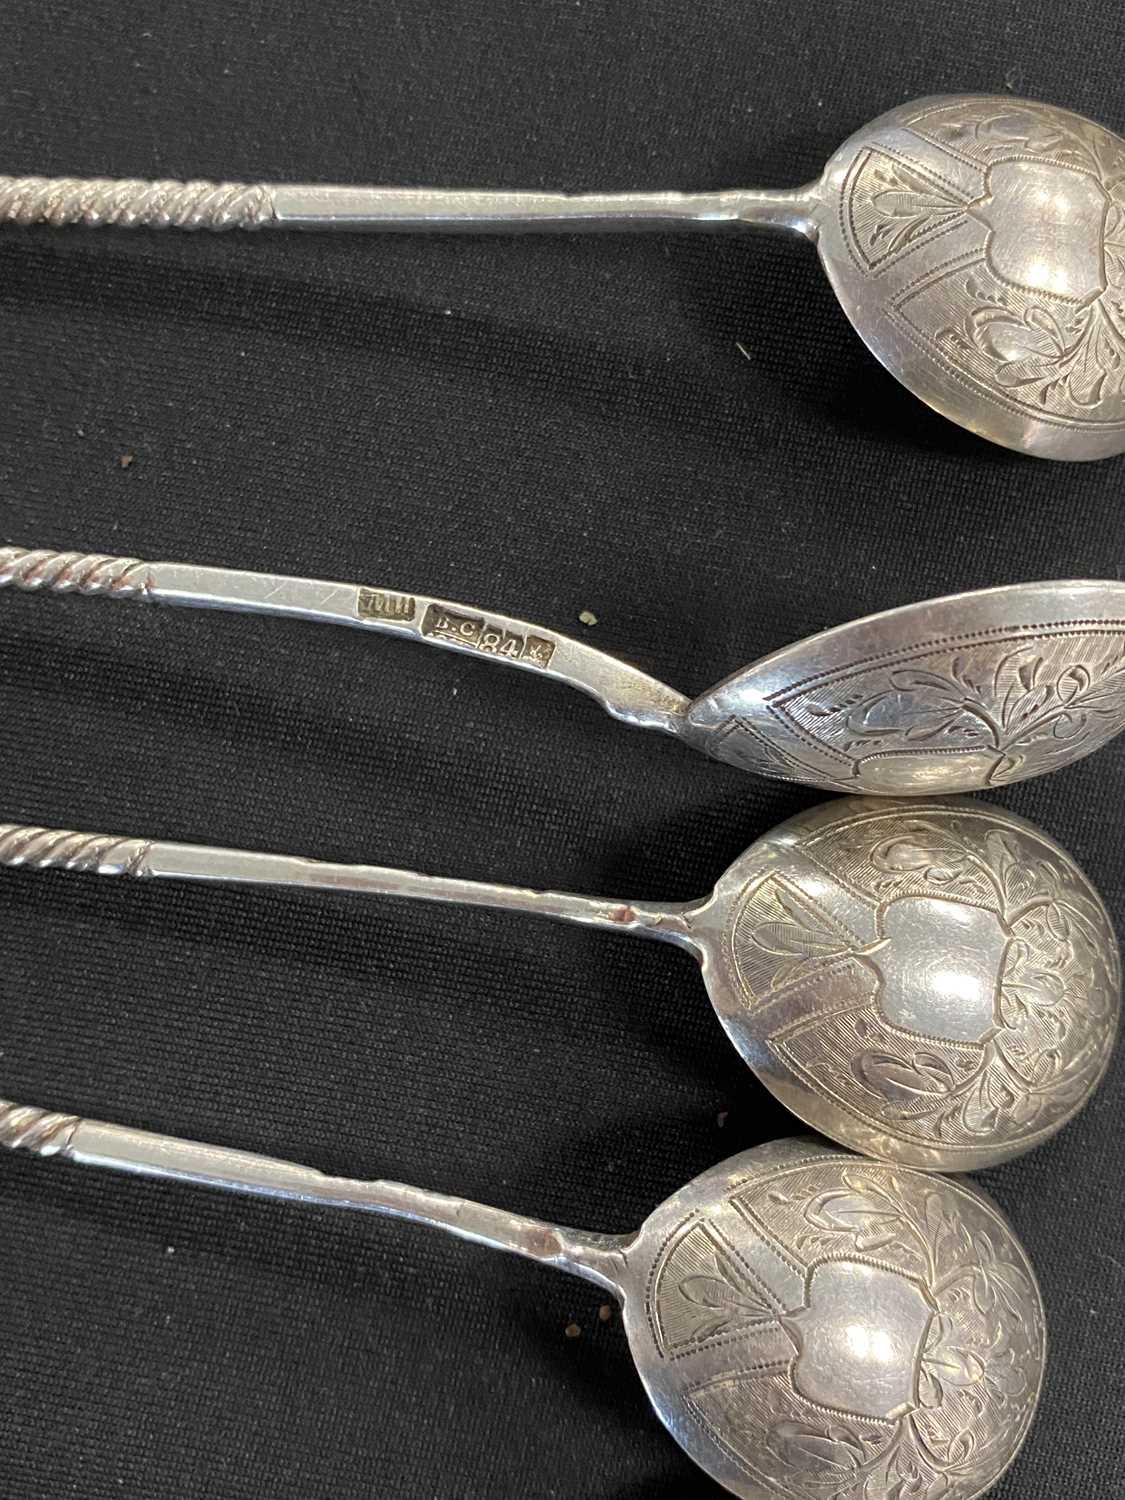 A collection of Russian silver teaspoons - Image 15 of 22